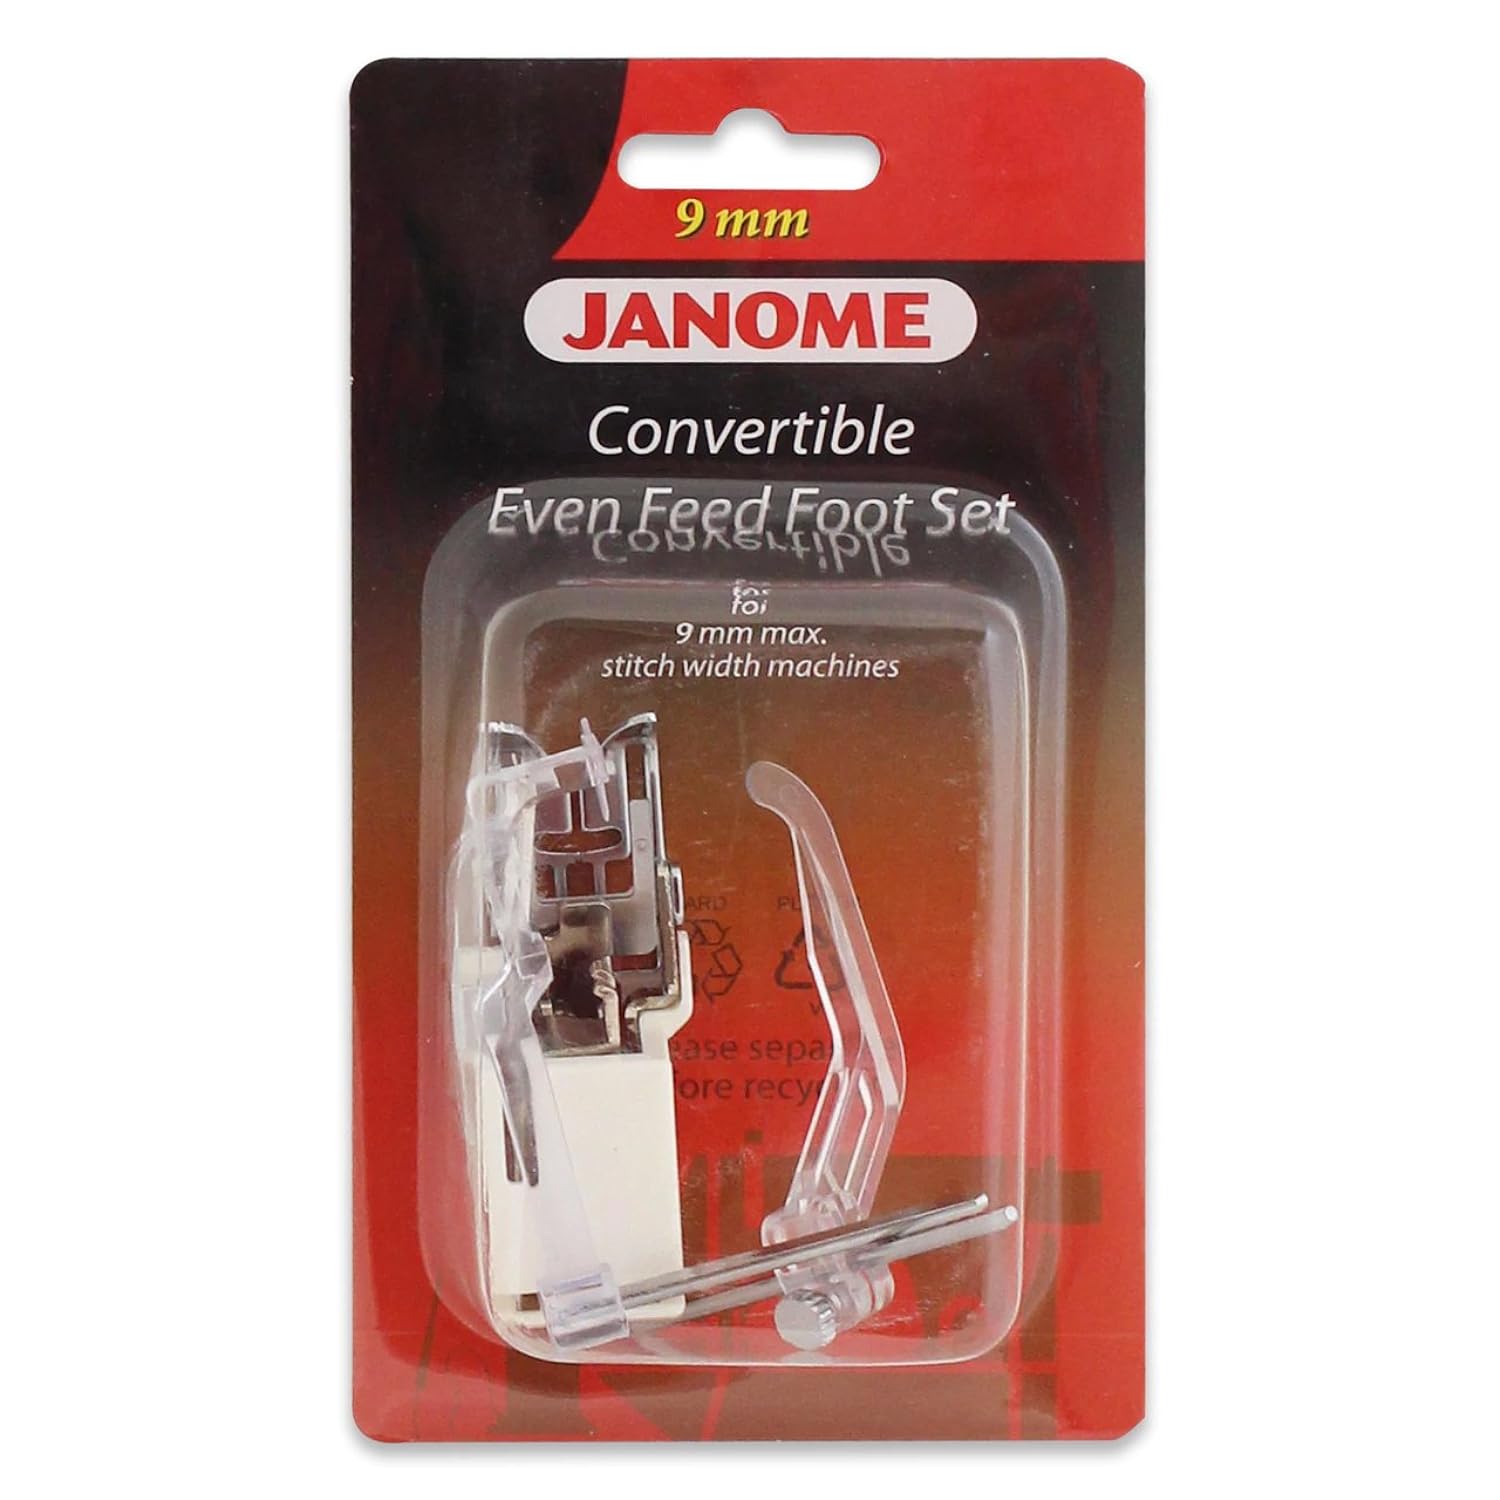 Janome Convertible Even Feed Foot Set for 9mm Non Acufeed Models